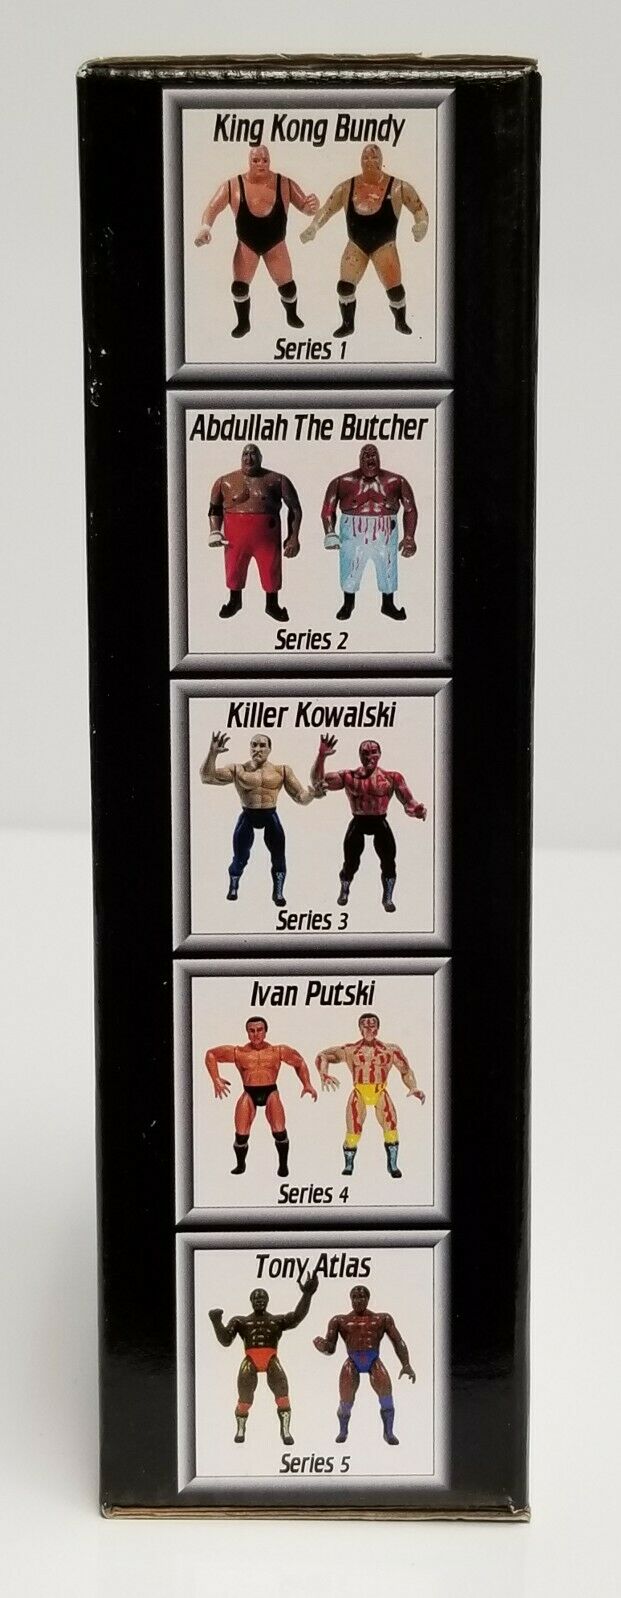 2001 FTC Legends of Professional Wrestling [Original] Series 21 Ricky Steamboat